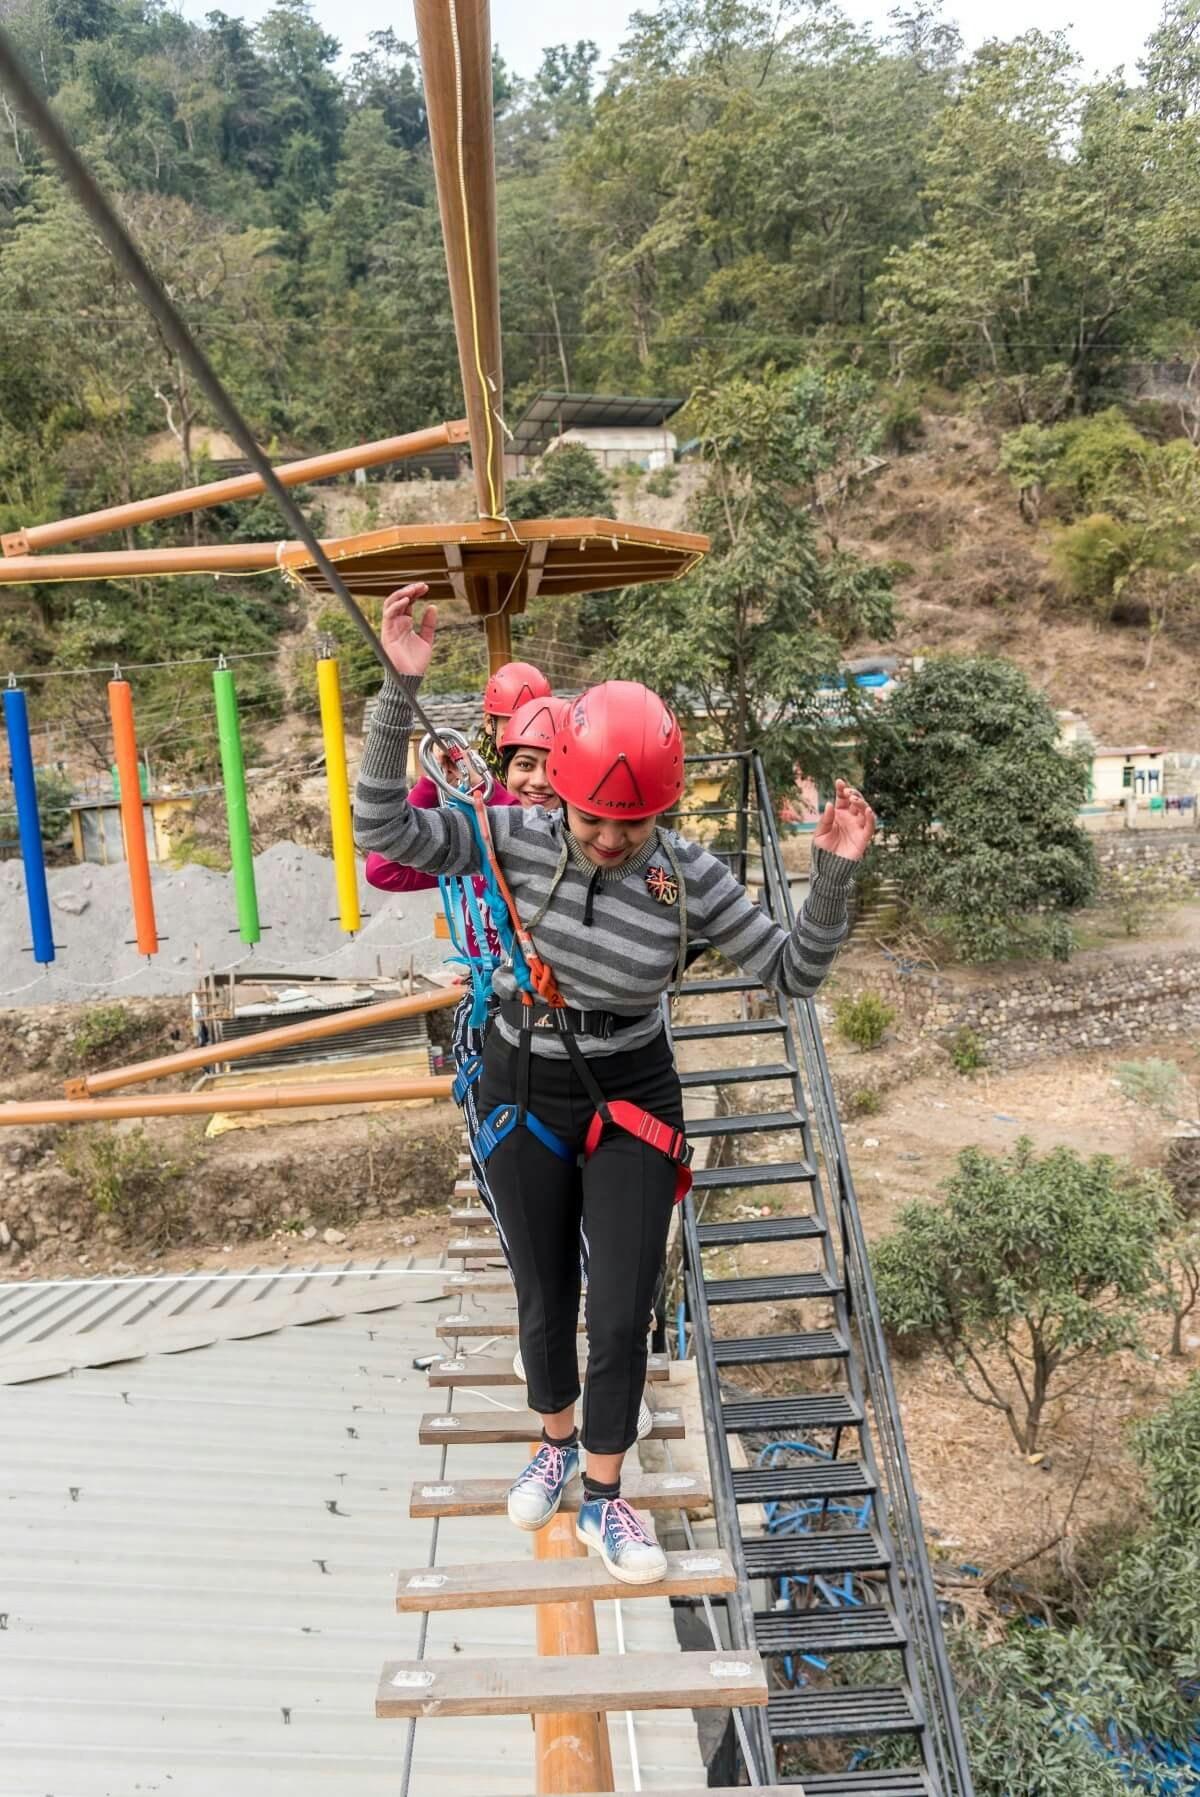 activities/rope-course/rope-course-04.jpg